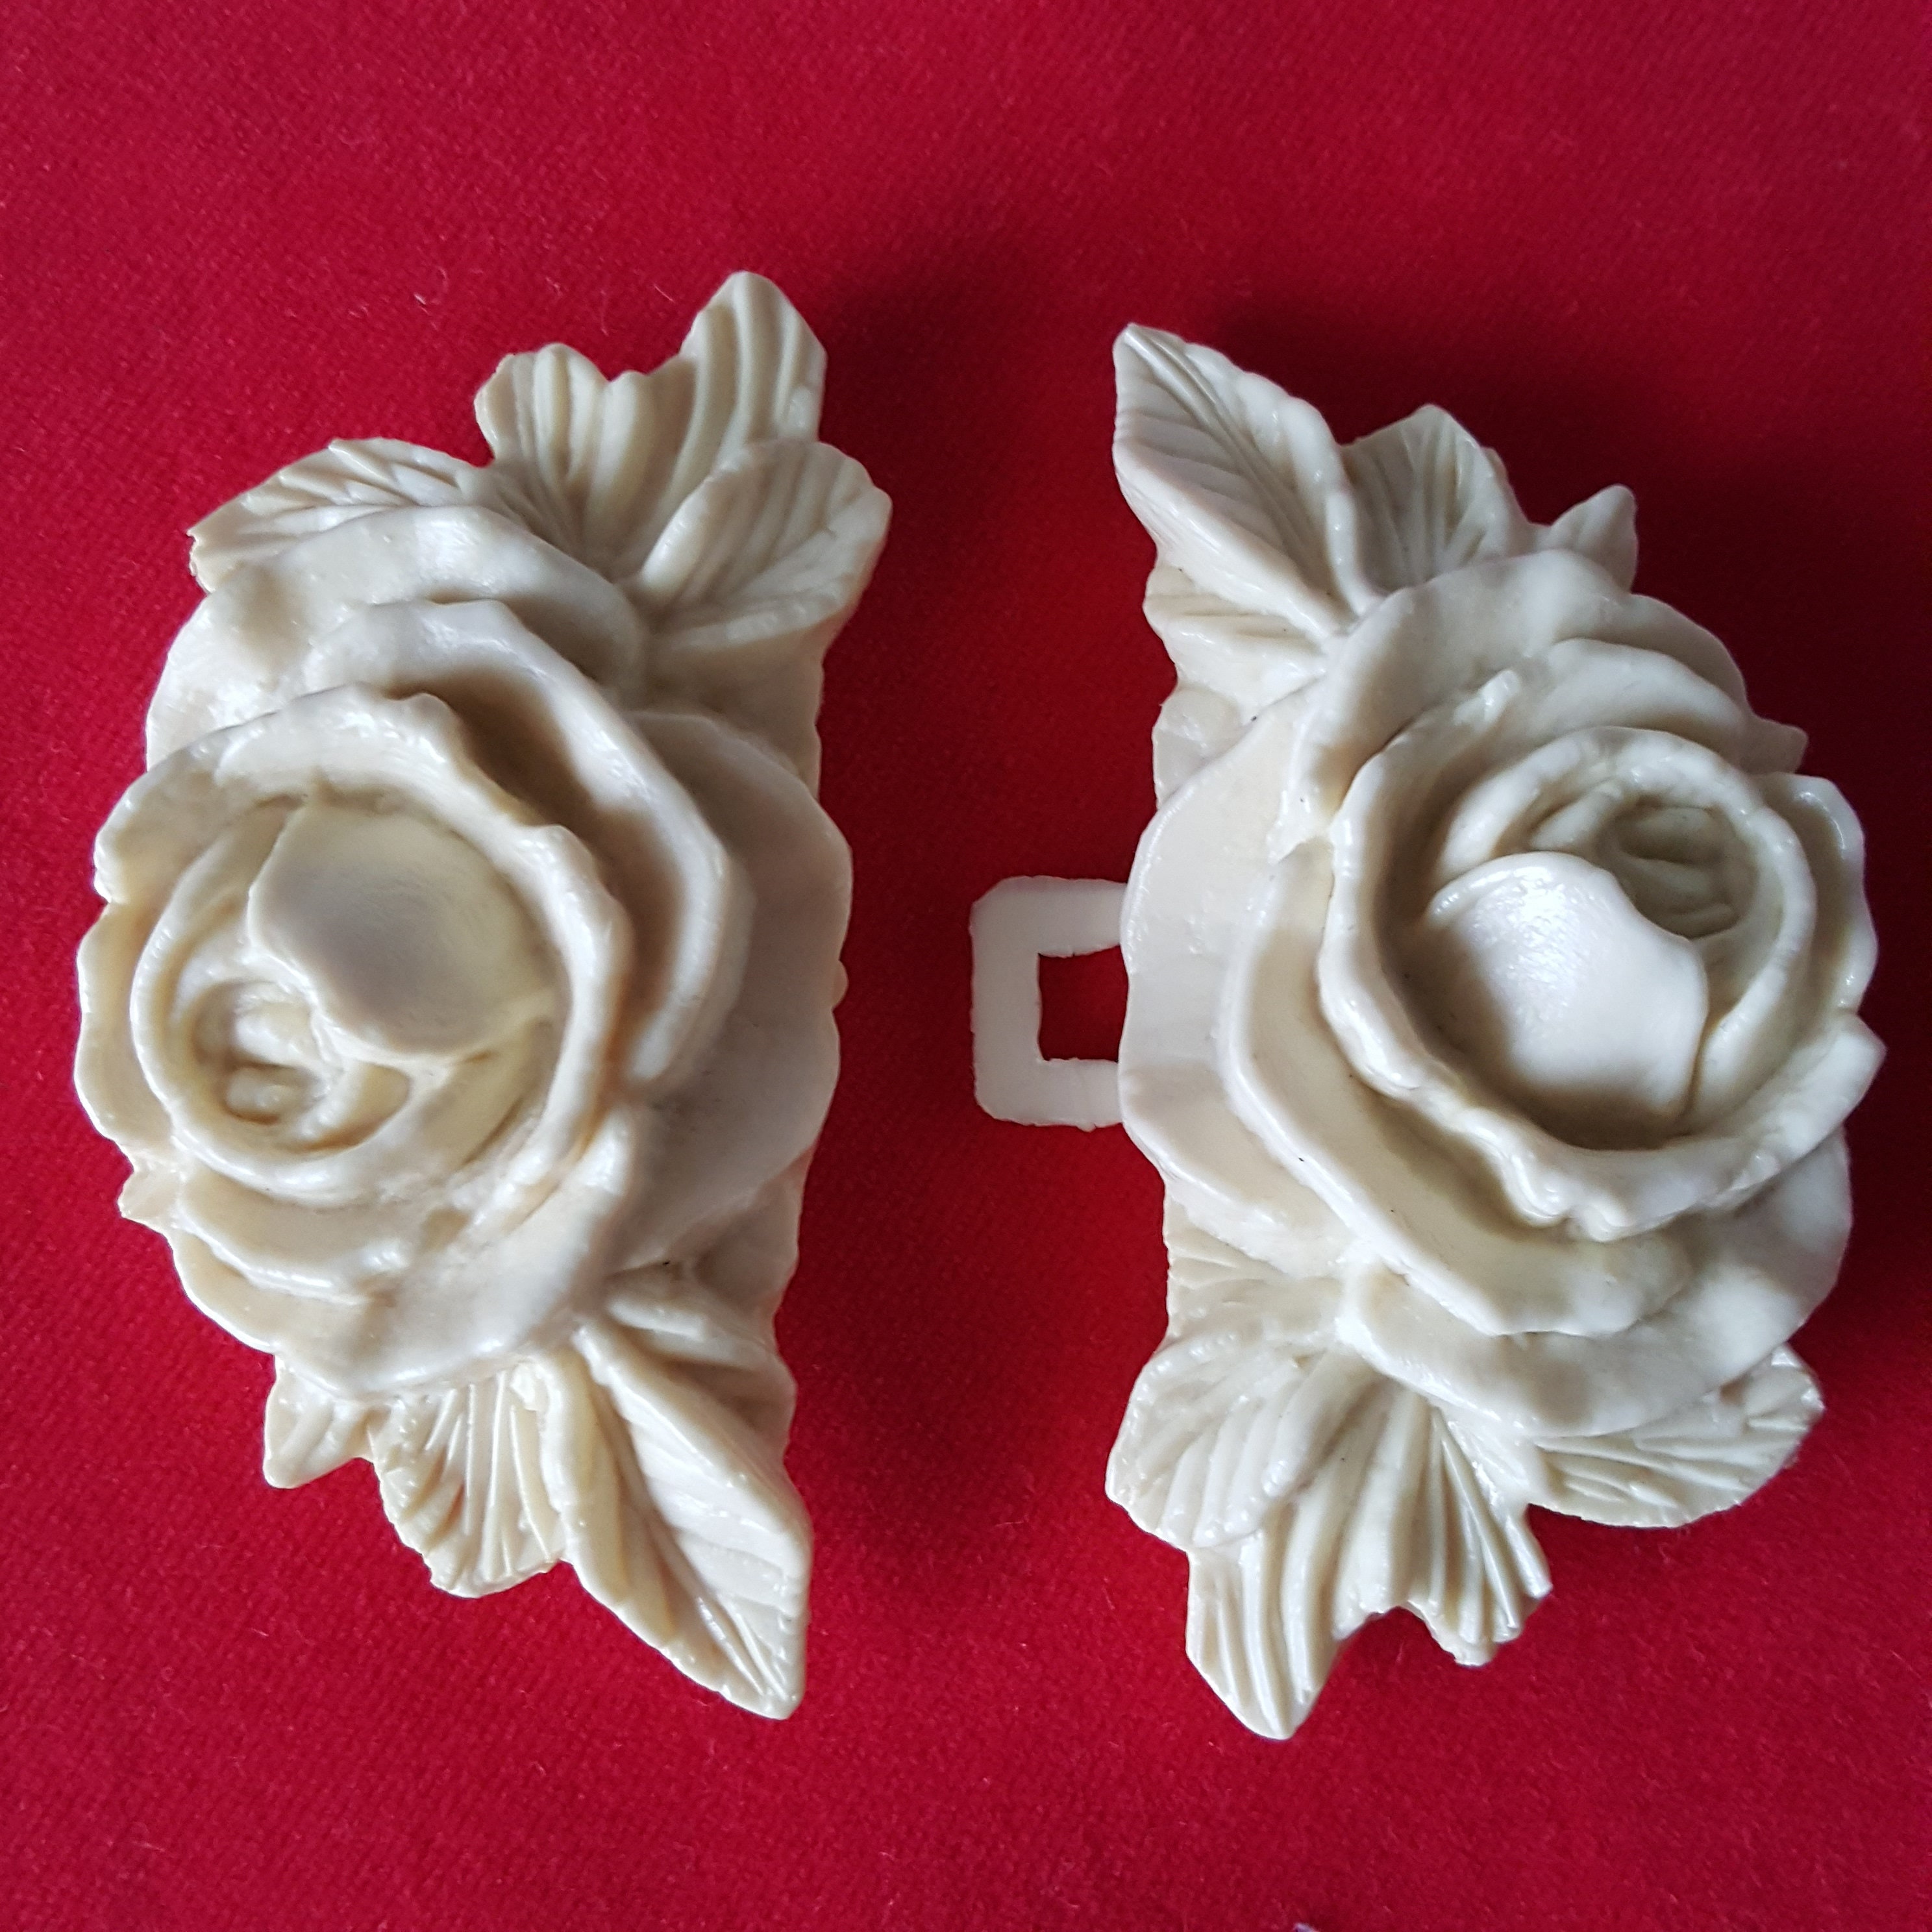 The 2 pieces have bars across for attaching to belt Vintage 2 piece plastic belt buckle with roses with hook and loop Probably 1950's.